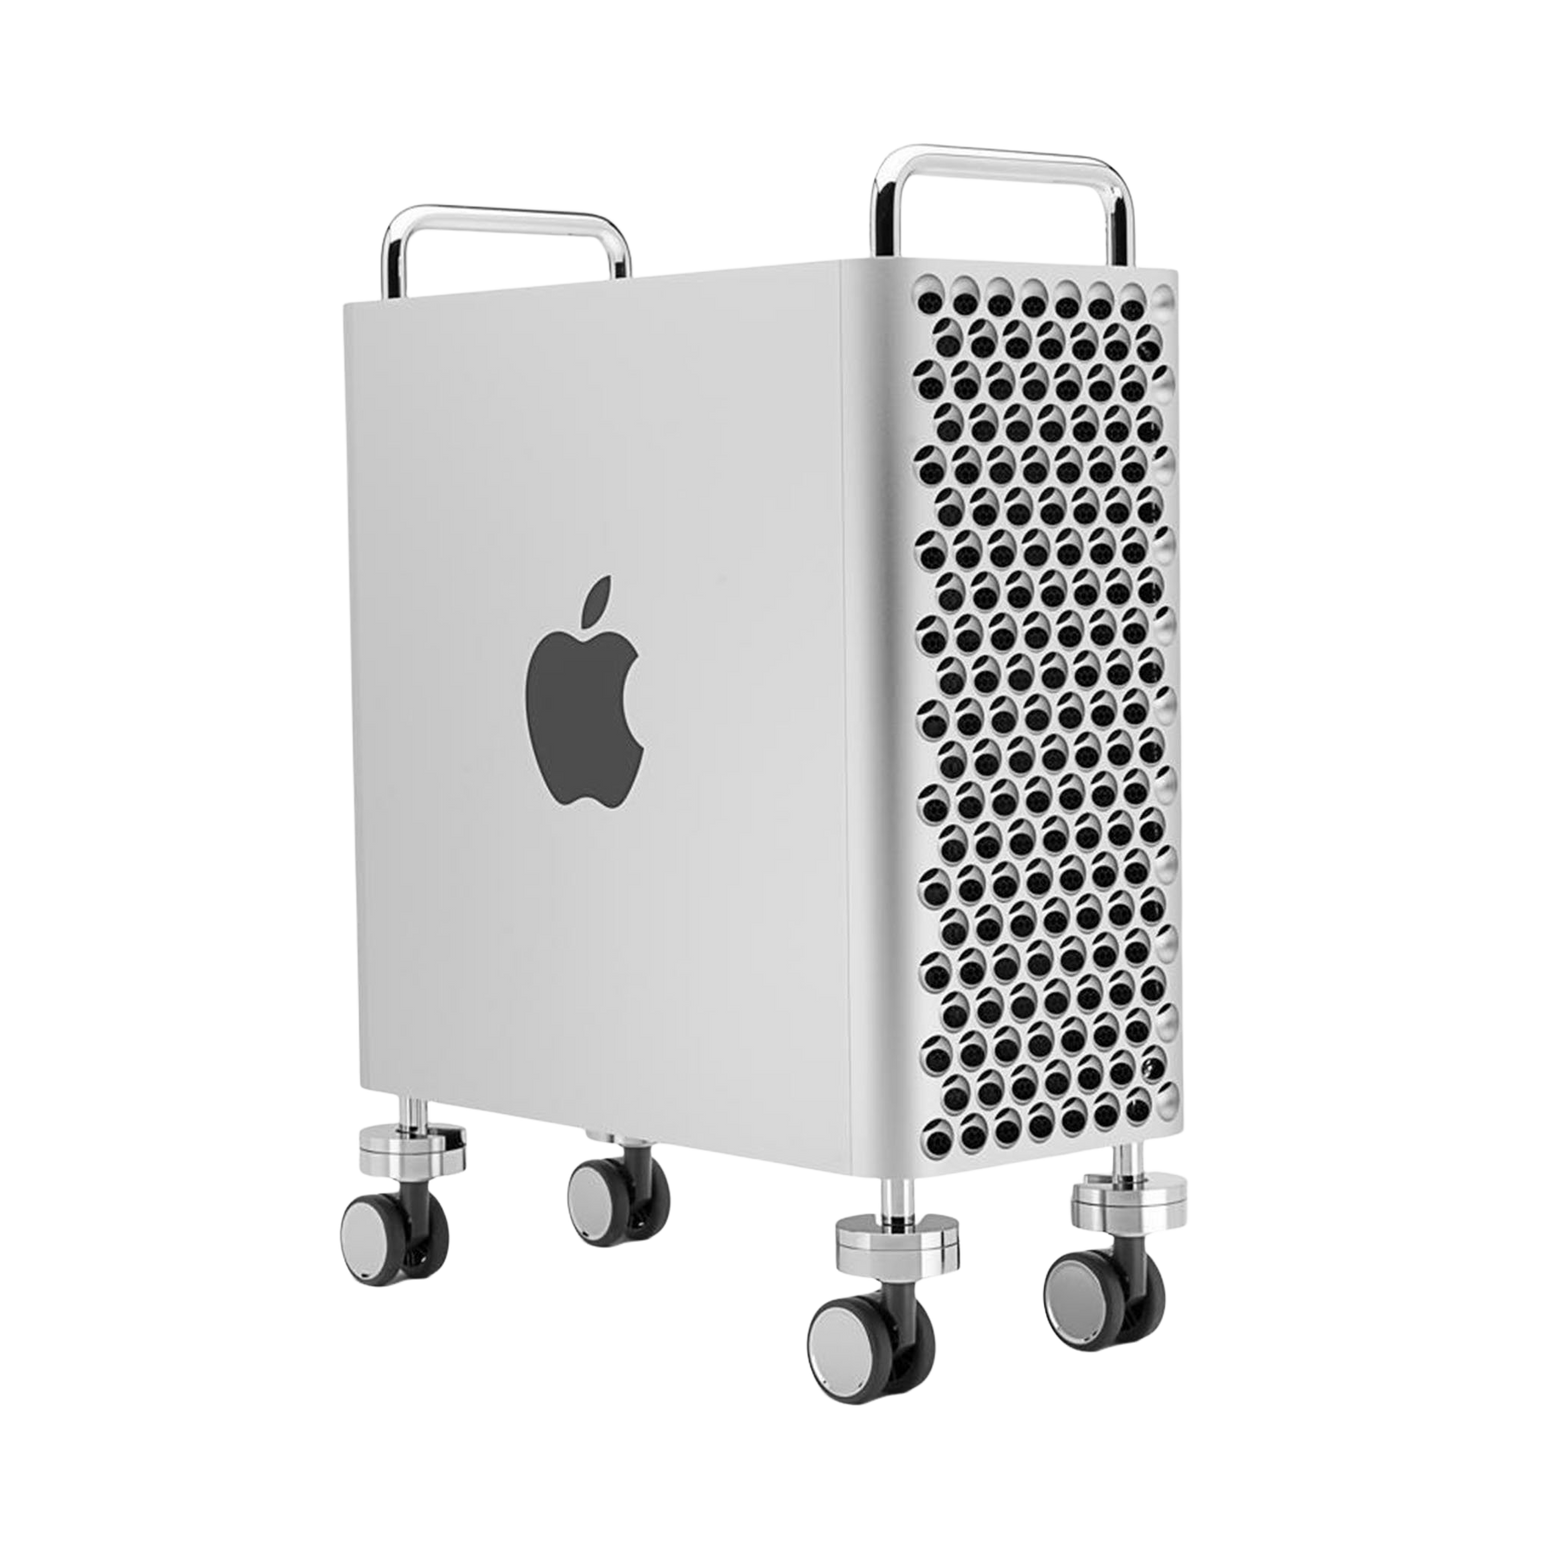 OWC Rover Pro Wheel Kit for Mac Pro